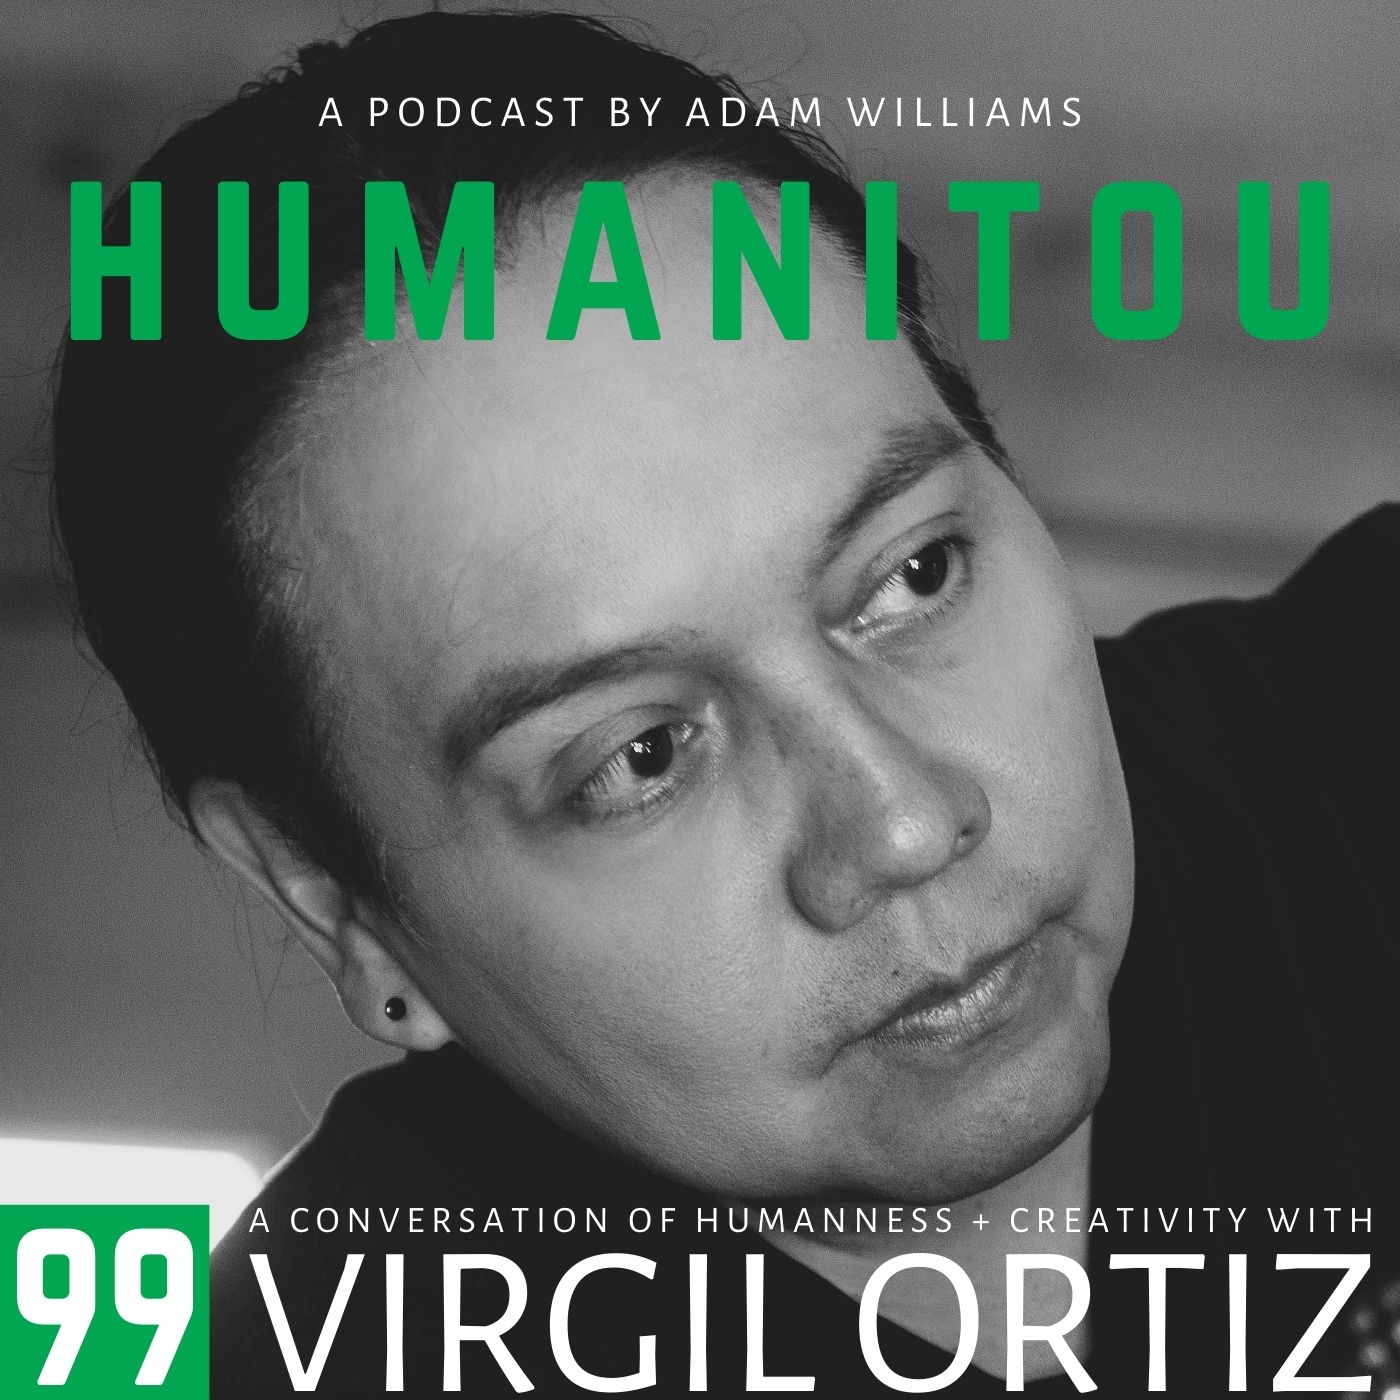 99: Virgil Ortiz, artist, on the Pueblo Revolt of 1680 and the reason he lives, on having a drink with Boy George and talking taboo topics